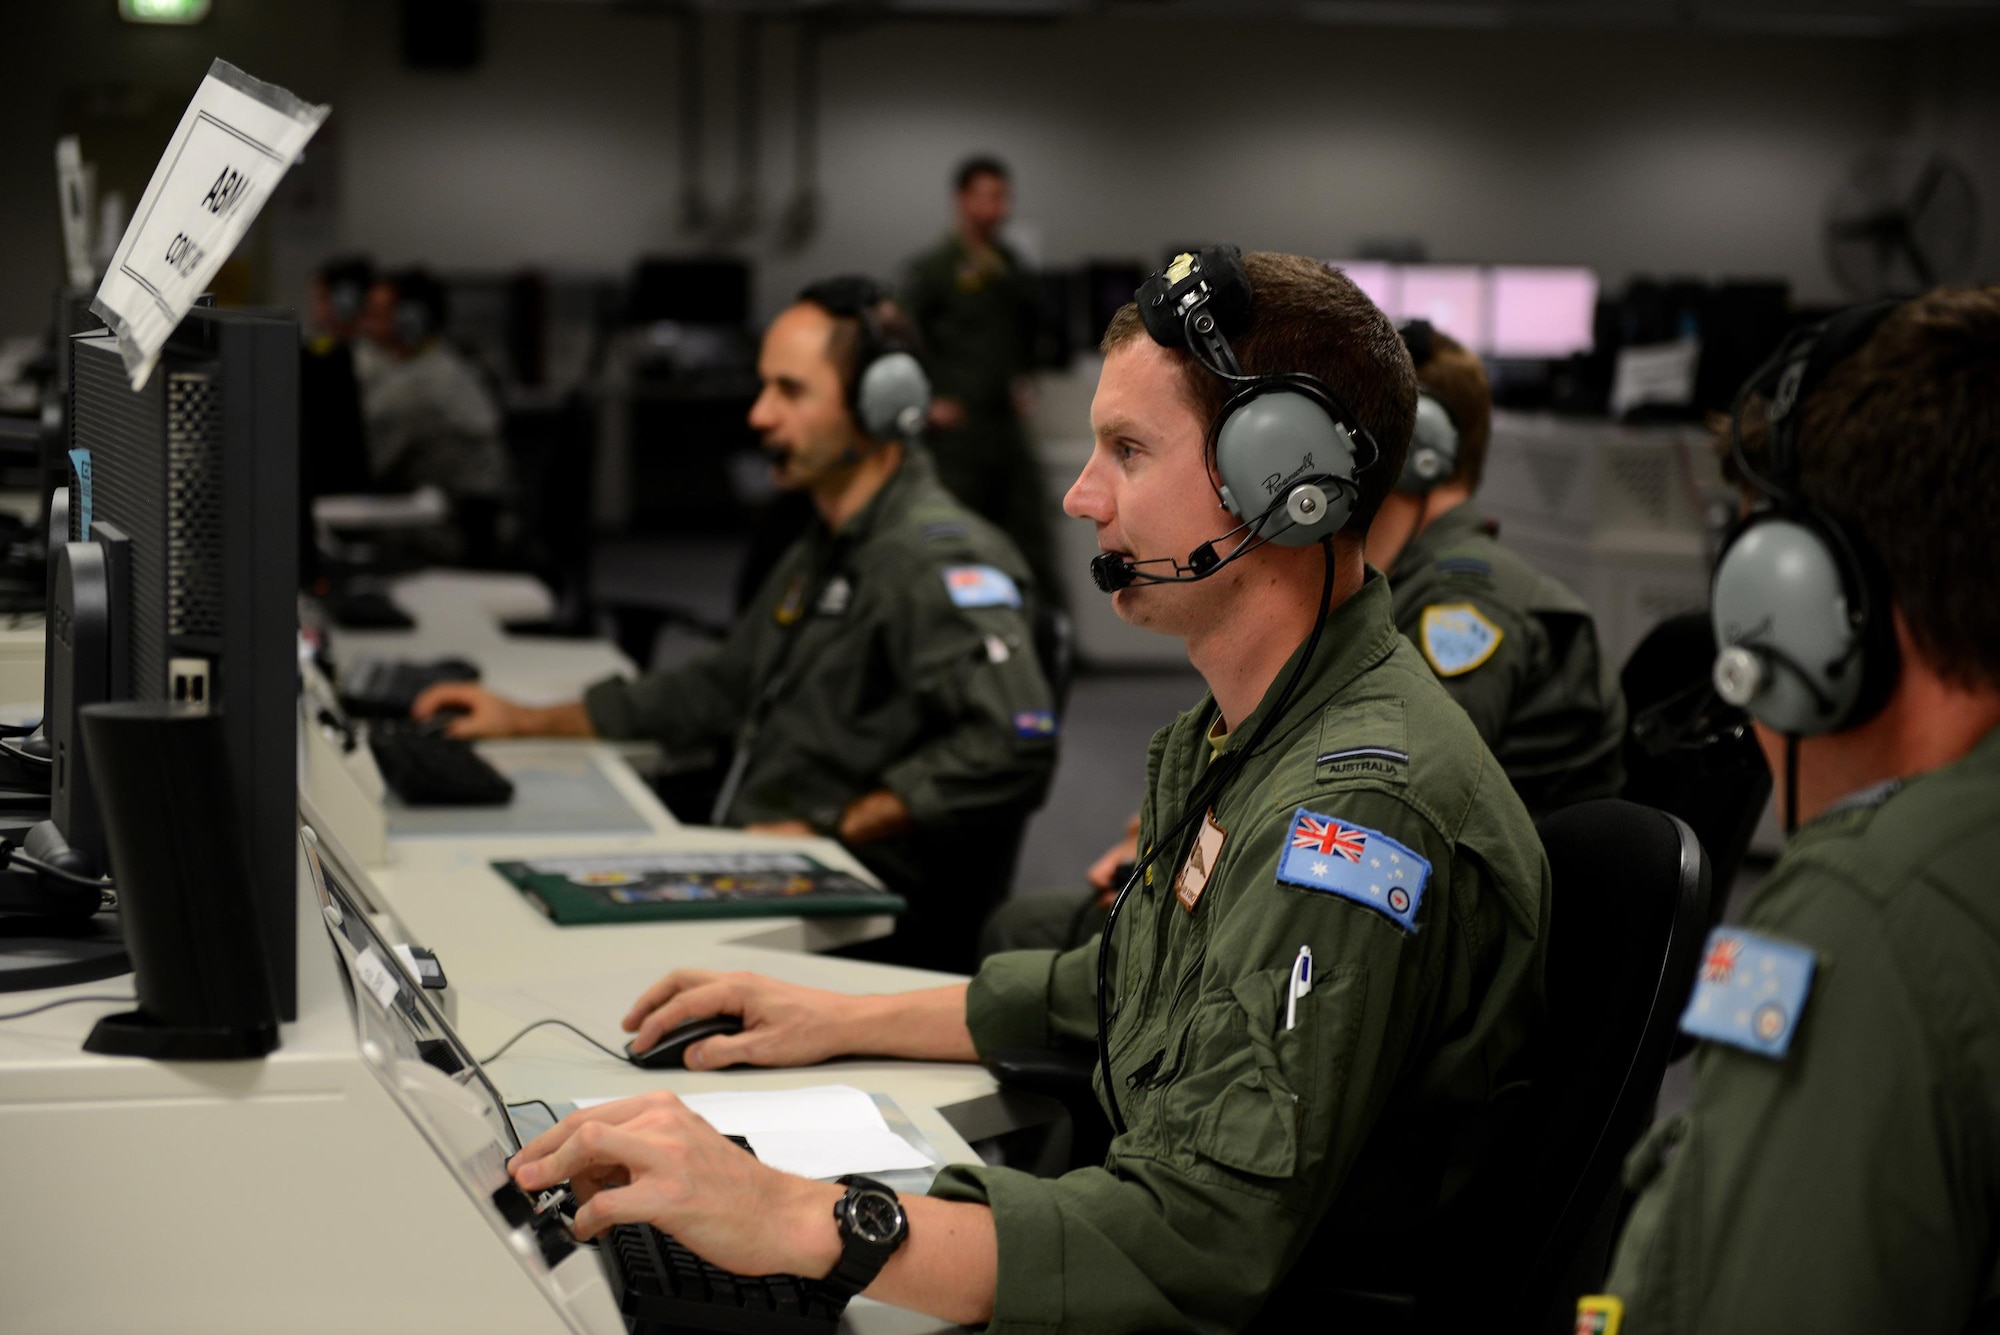 Royal Australian Air Force Flying Officer “Wally”, 41 Wing Surveillance and Control Training Unit air battle manager, debriefs with his counterpart in the Tactical Control Center, on RAAF Base Williamtown, New South Wales, Australia, March 23, 2017. Throughout the duration of the exercise, air battle managers are primarily responsible for command and control of the RAAF ‘Blue Air’ forces and for overseeing battle management operations when scenarios are active. (U.S. Air Force photo by Tech. Sgt. Steven R. Doty)